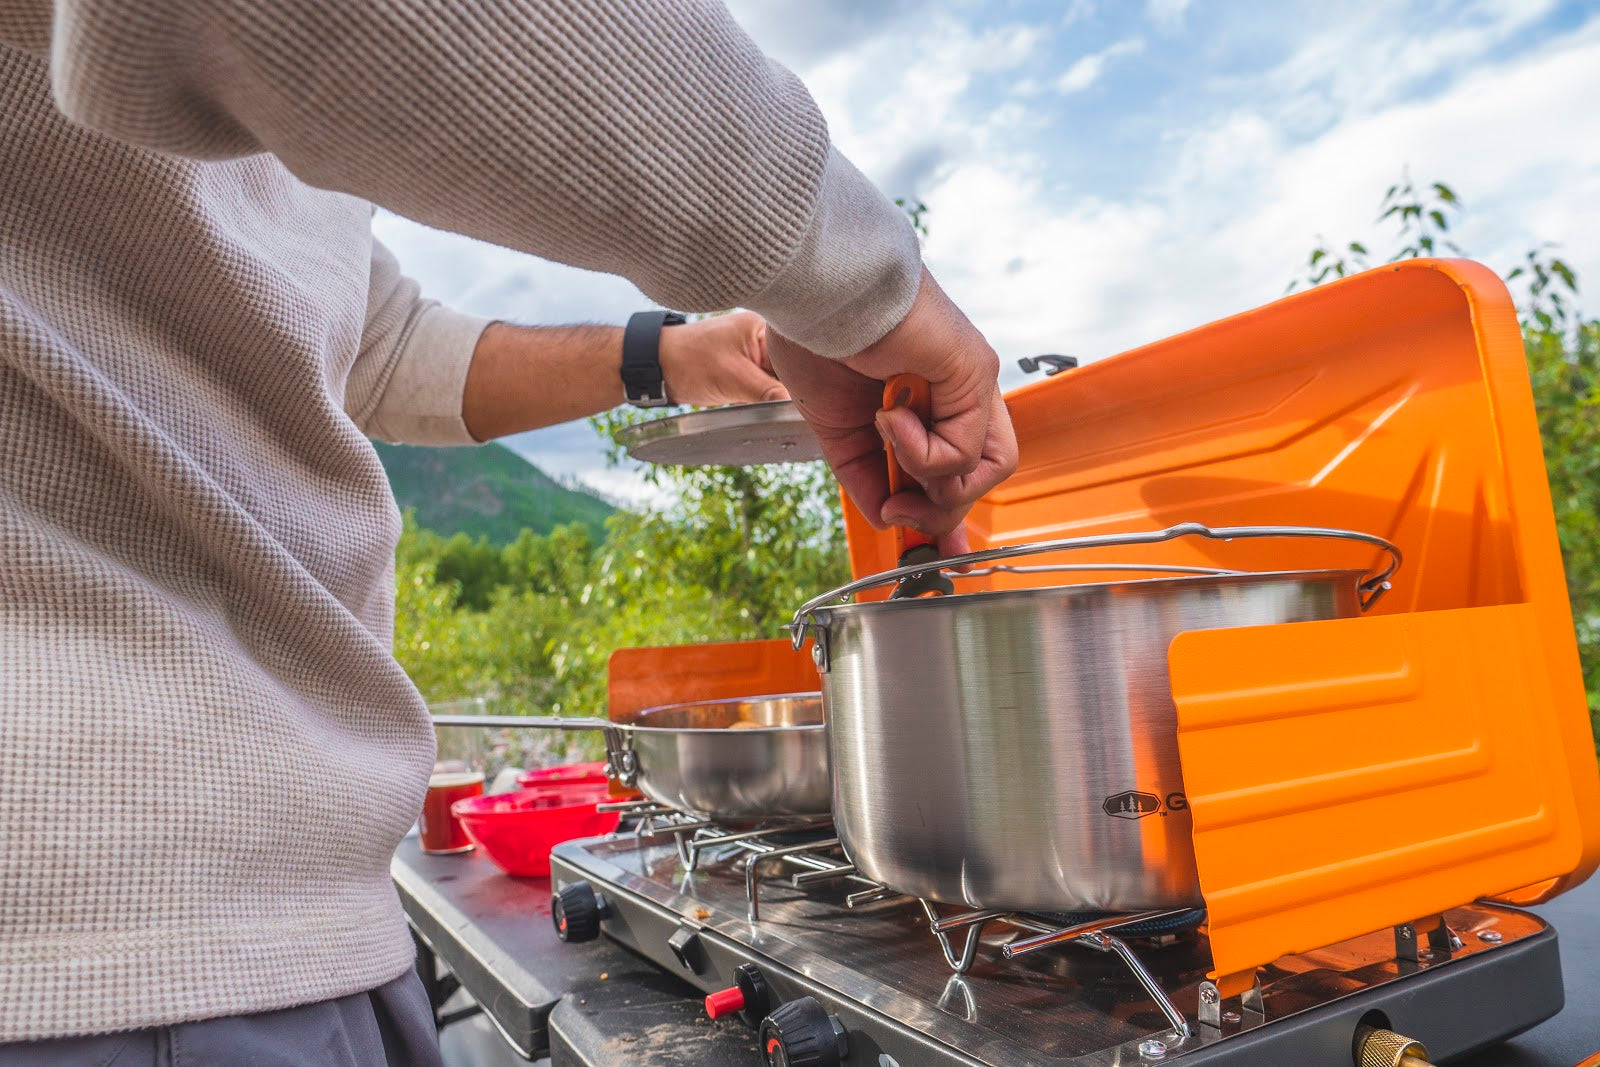 Looking For Your Perfect Camp Stove? Look No Further.